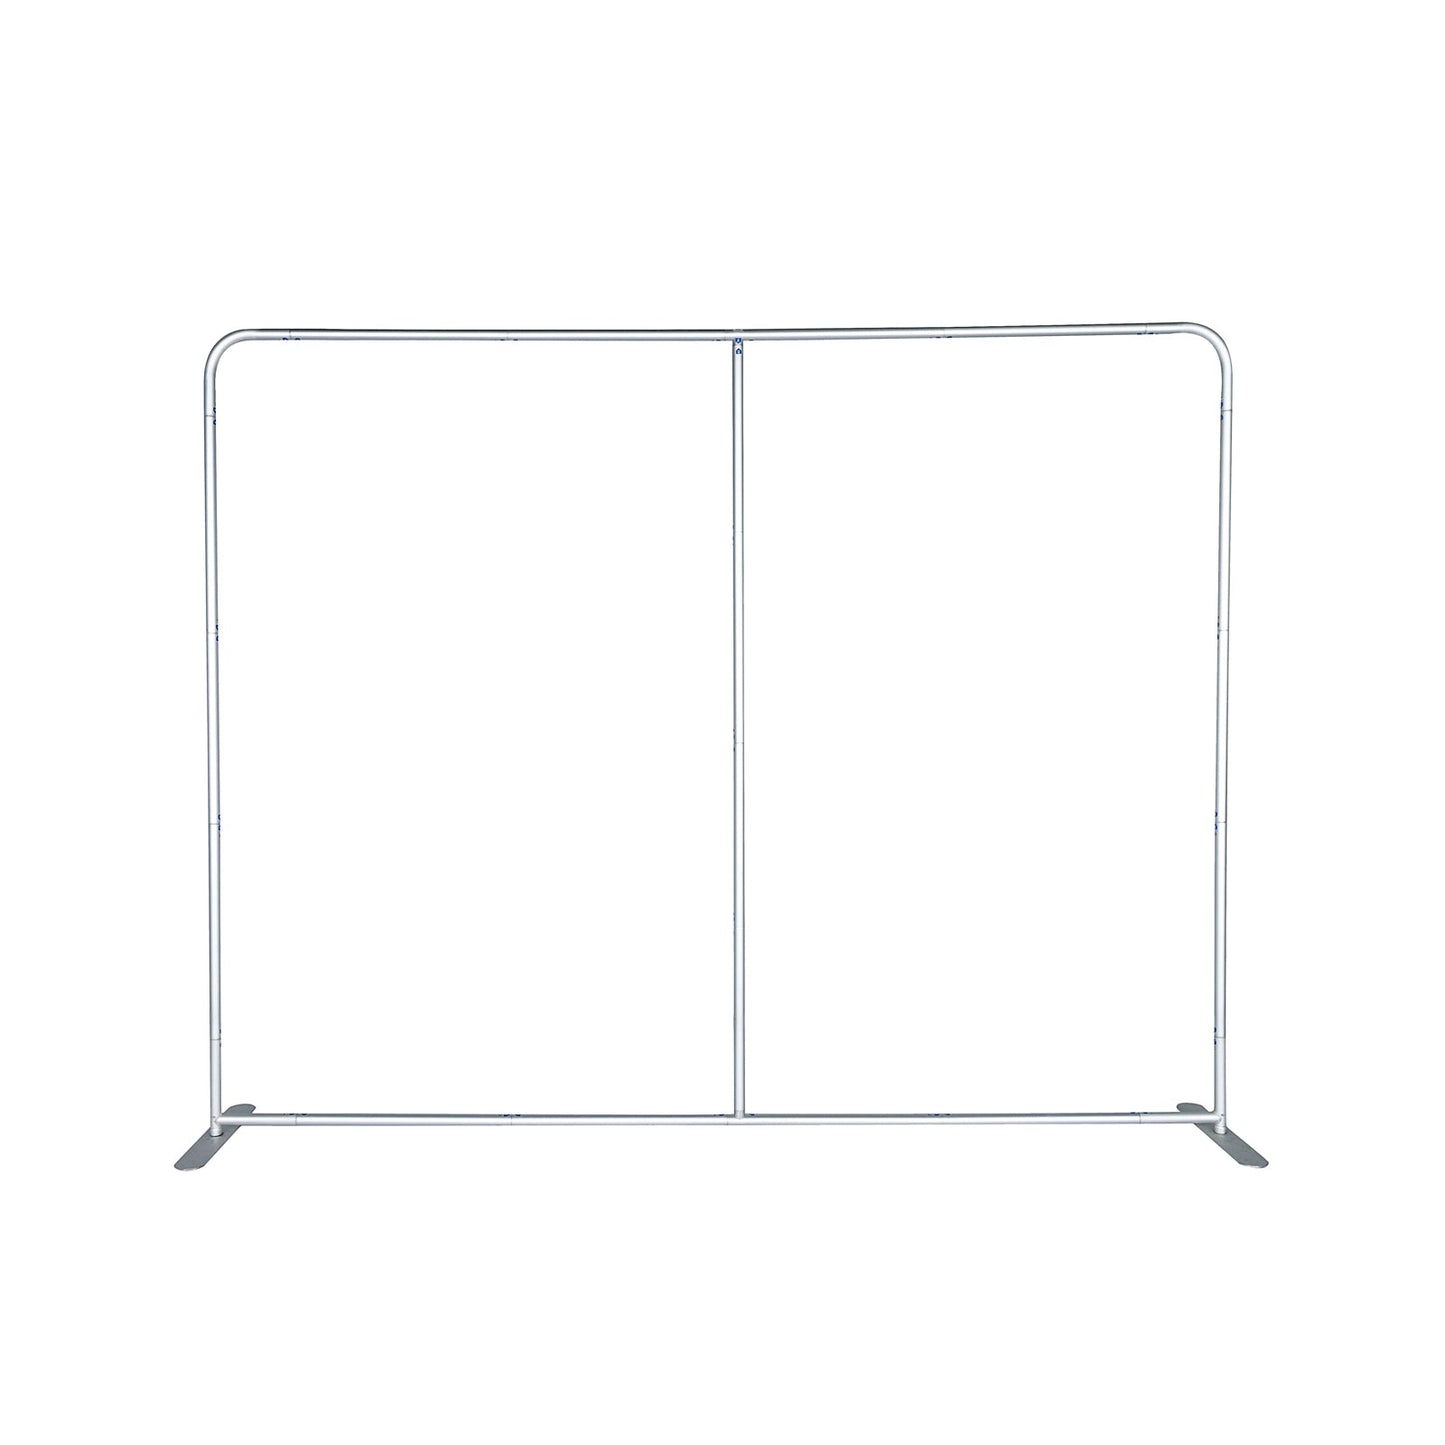 2000mm Fabric Display Stand - Straight